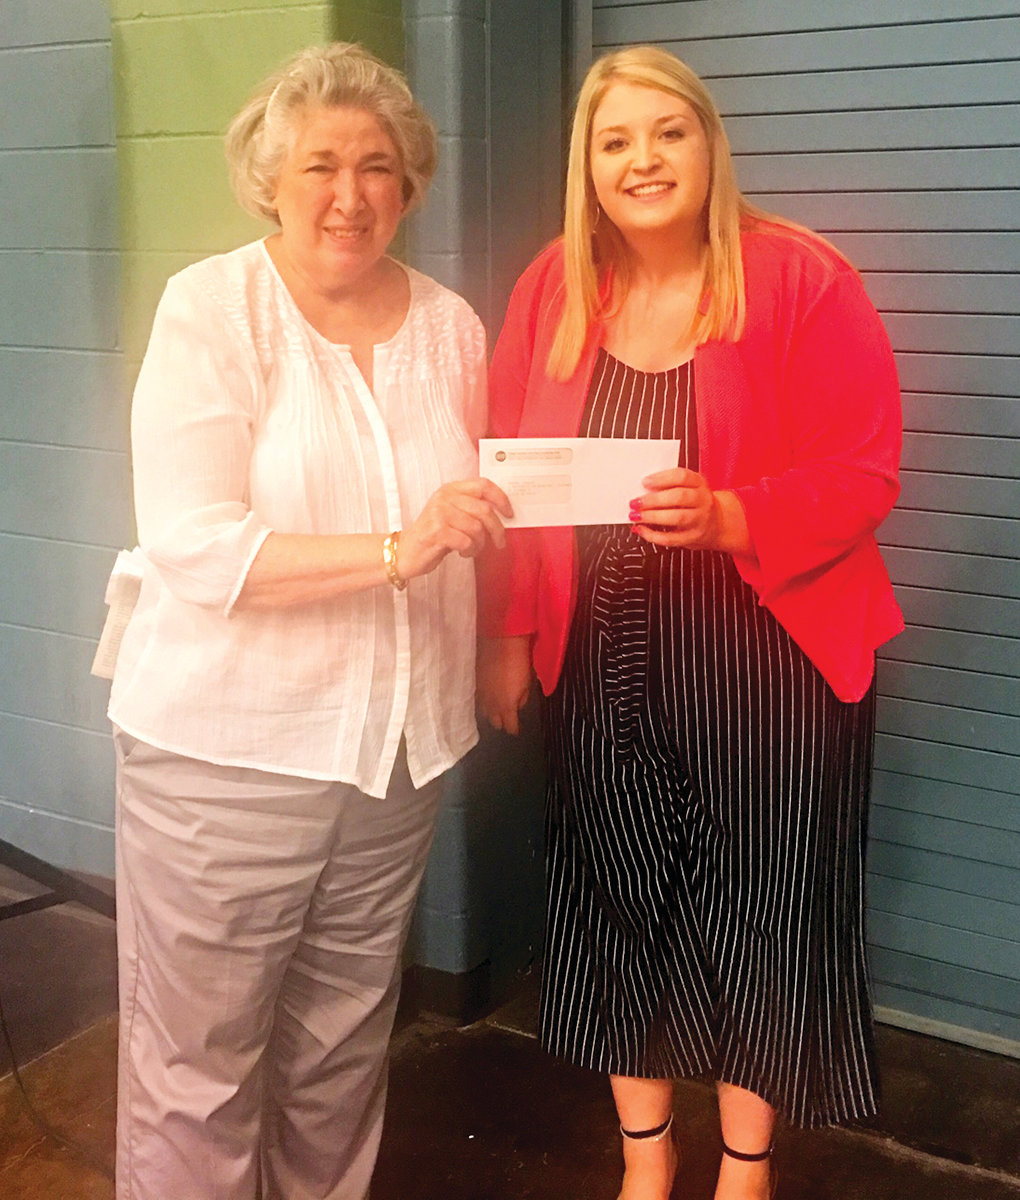 Paula Hilkemeyer presents the first installment of the Gilbert G. Hilkemeyer Scholarship to Reagan Limbach of Eugene Friday’s annual meeting of Three Rivers Electric Cooperative members.